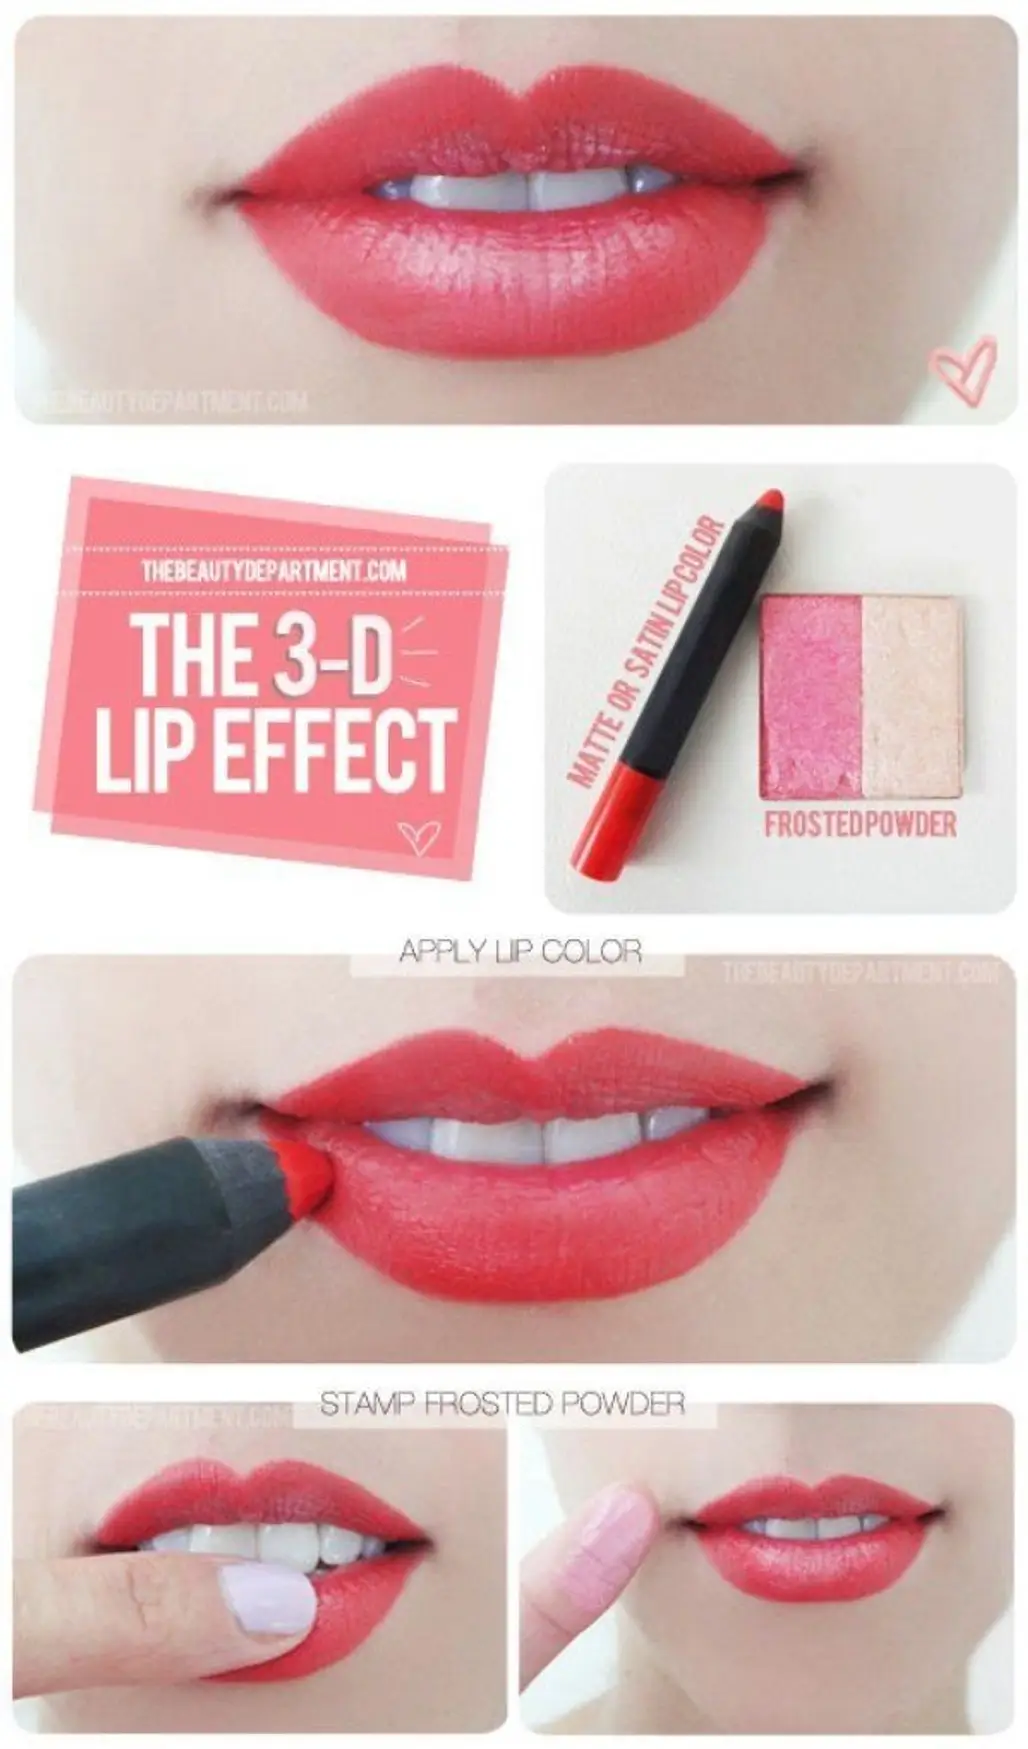 lip,face,pink,cosmetics,mouth,